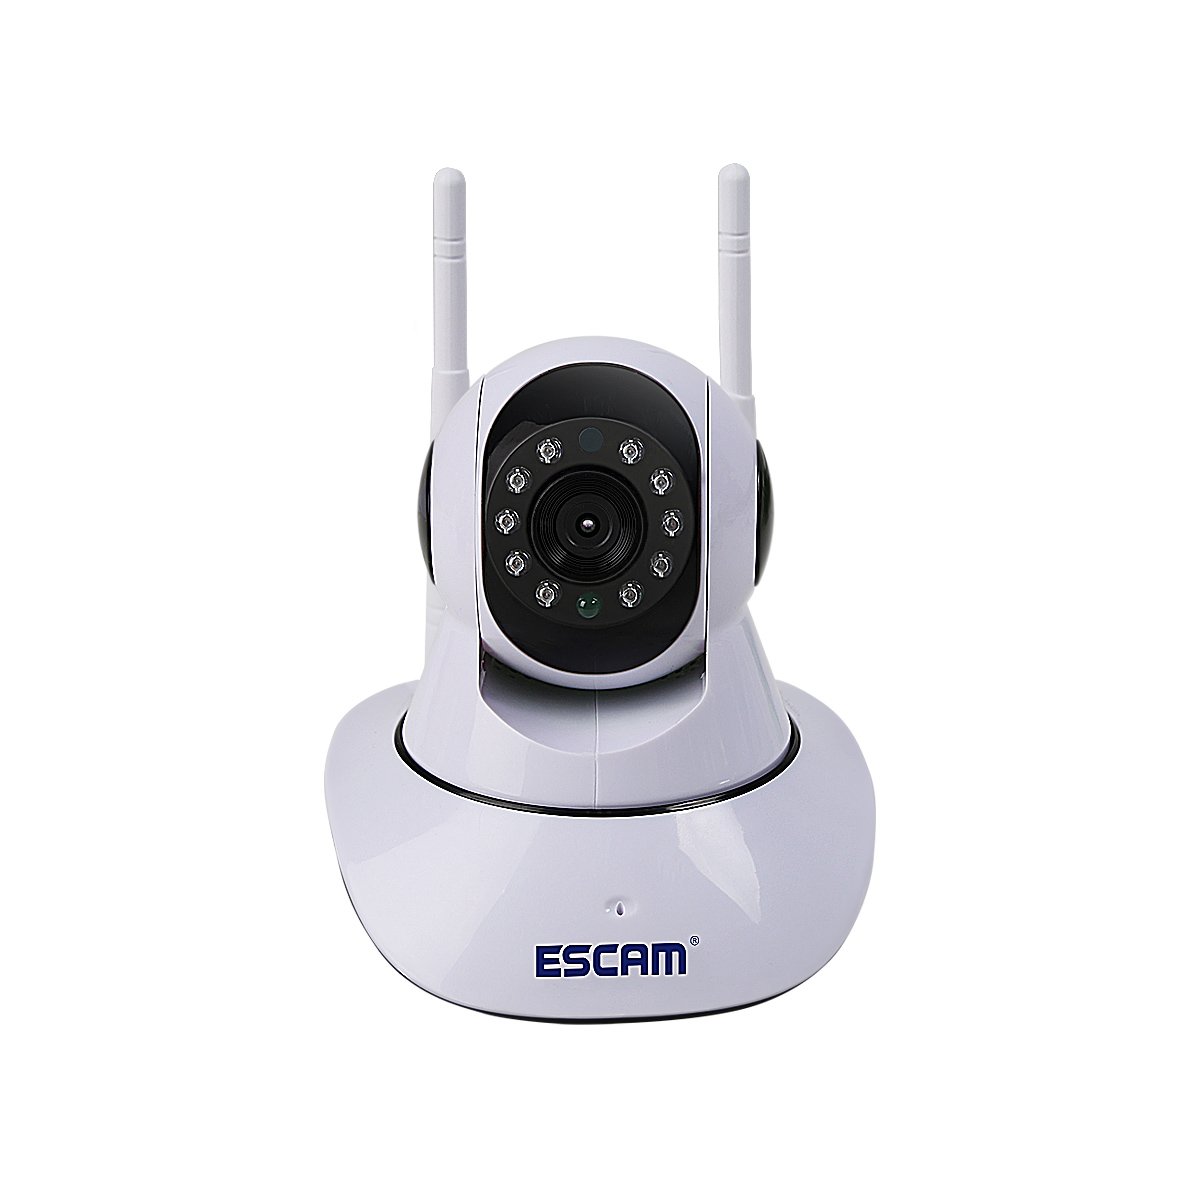 ESCAM G02 Dual Antenna 720P Pan/Tilt WiFi IP IR Camera Support ONVIF Max Up to 128GB Video Monitor 2